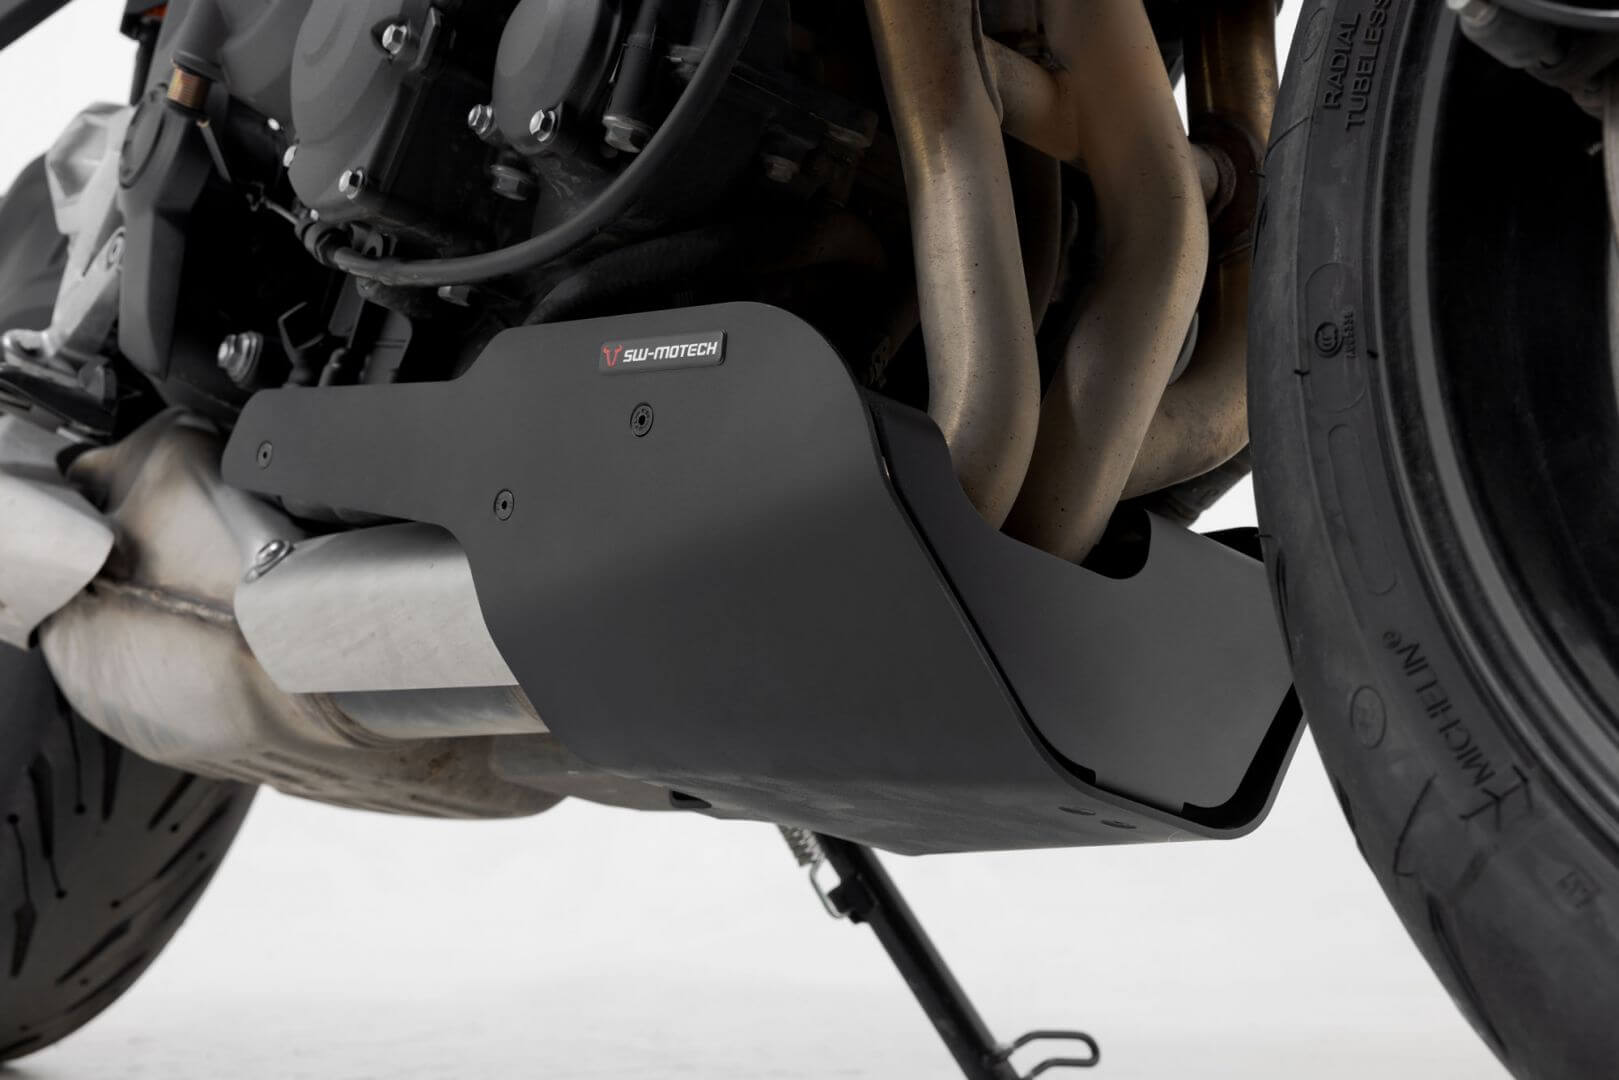 SW-MOTECH equips the Triumph Trident 660 with accessories - SW-MOTECH